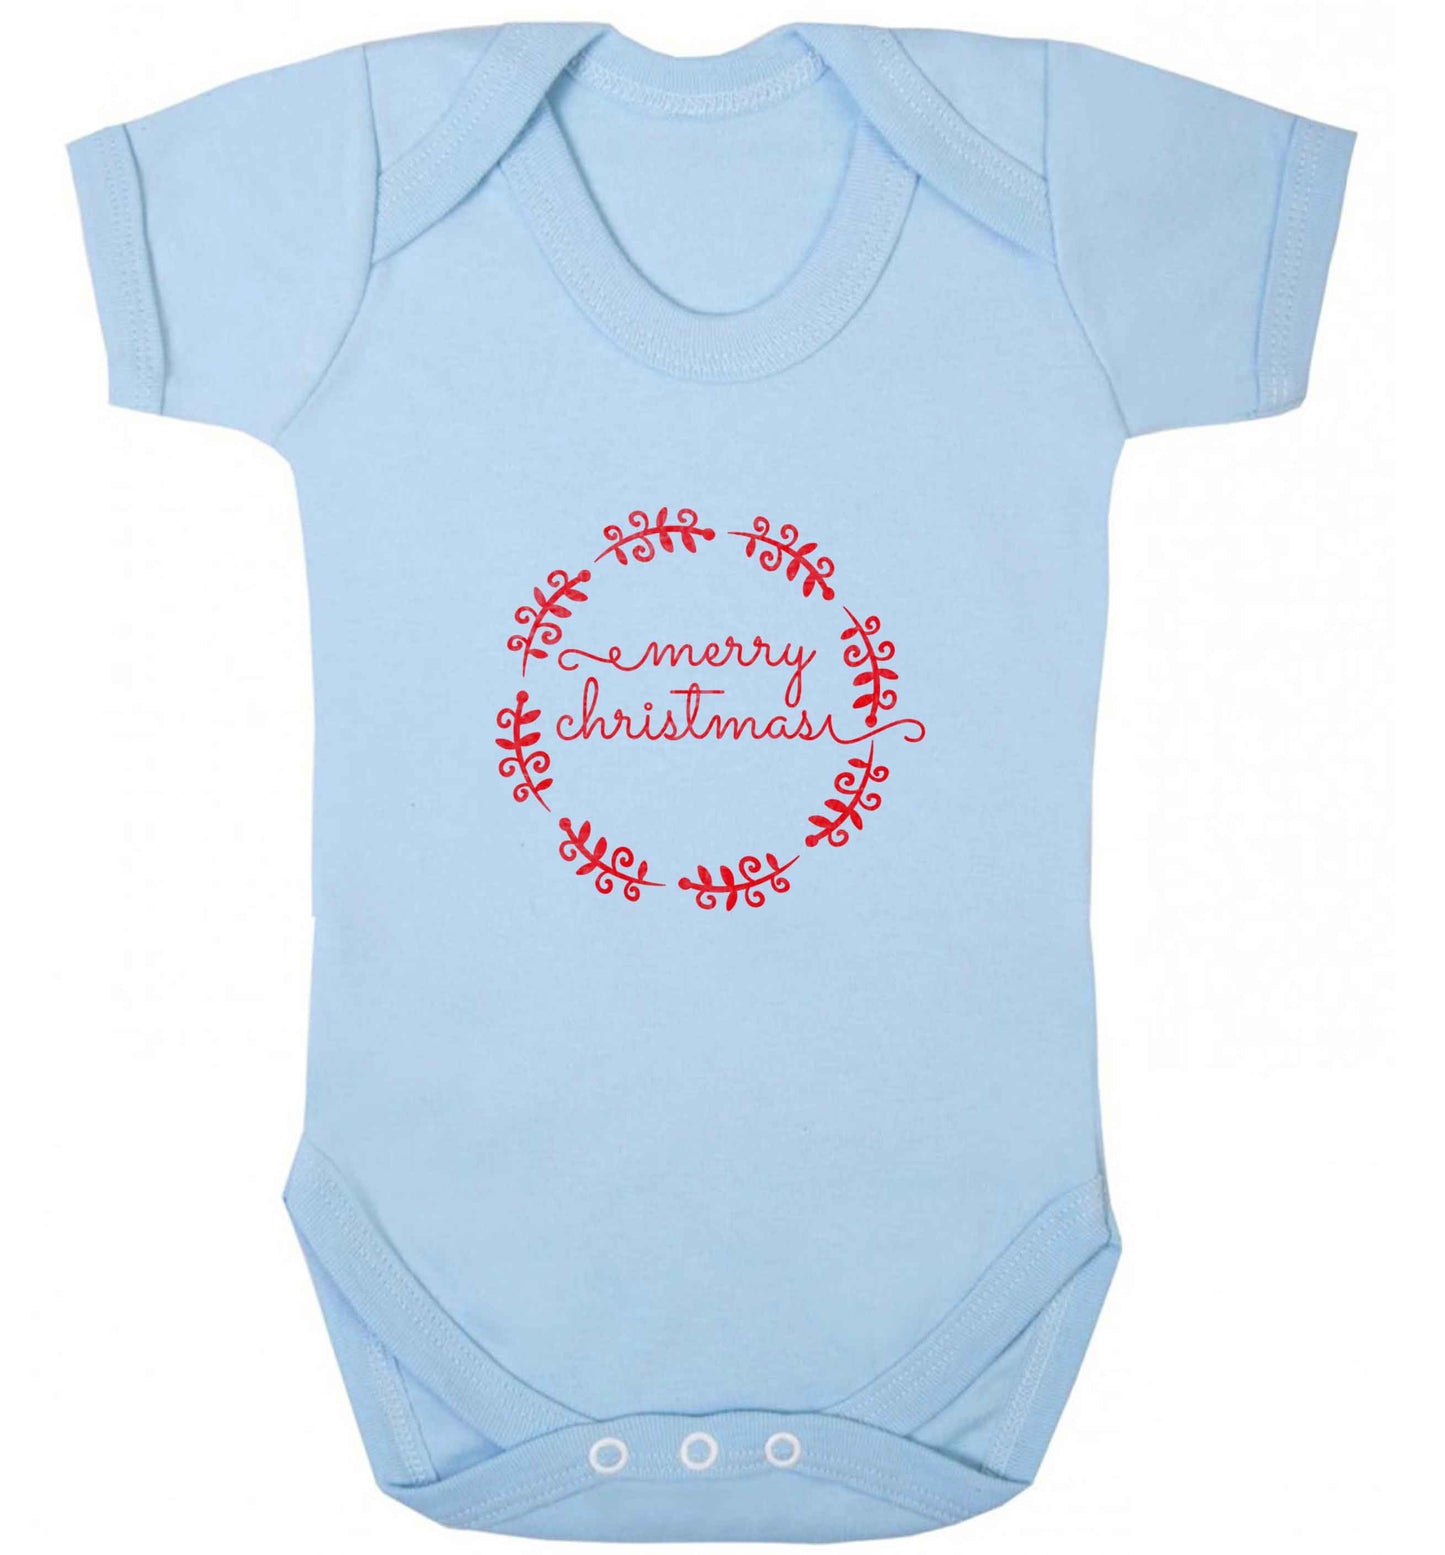 Merry christmas baby vest pale blue 18-24 months